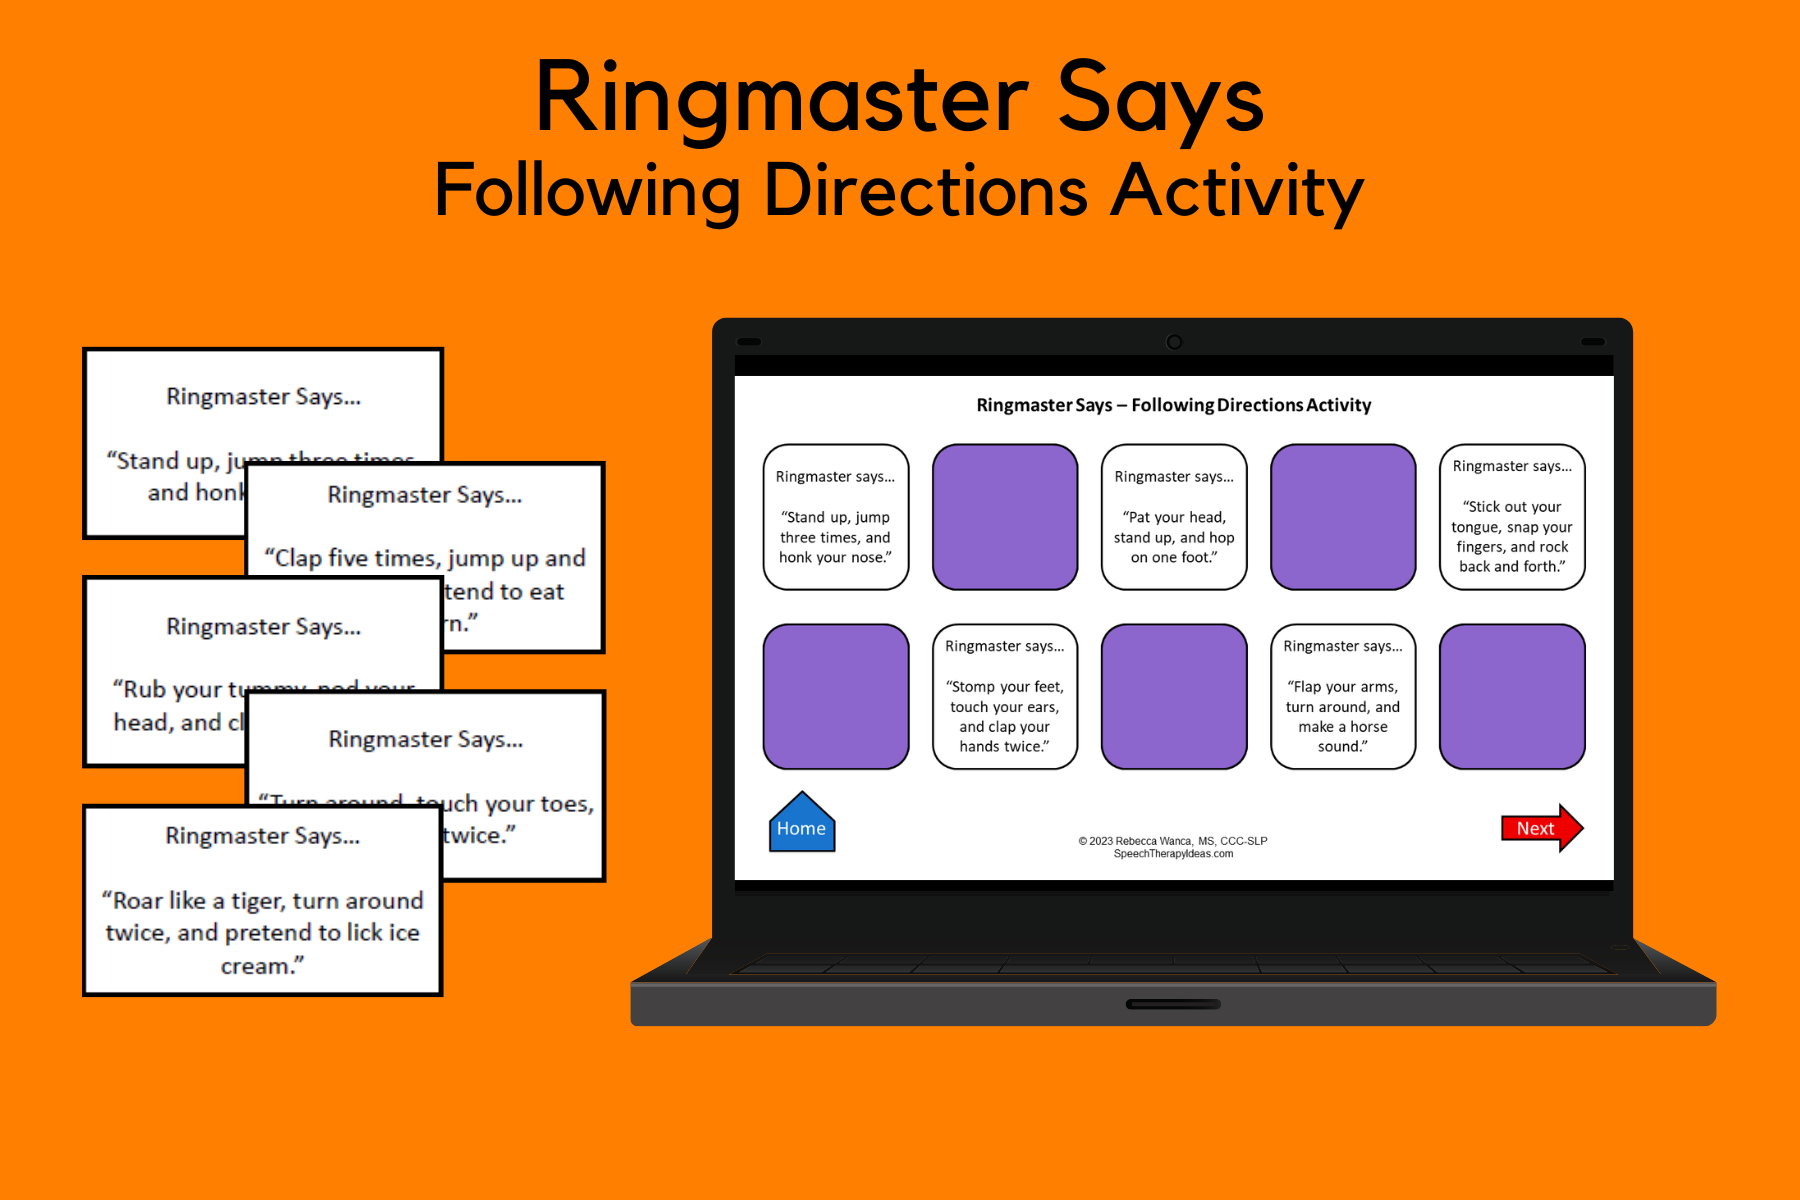 Ringmaster Says – Following Directions Activity